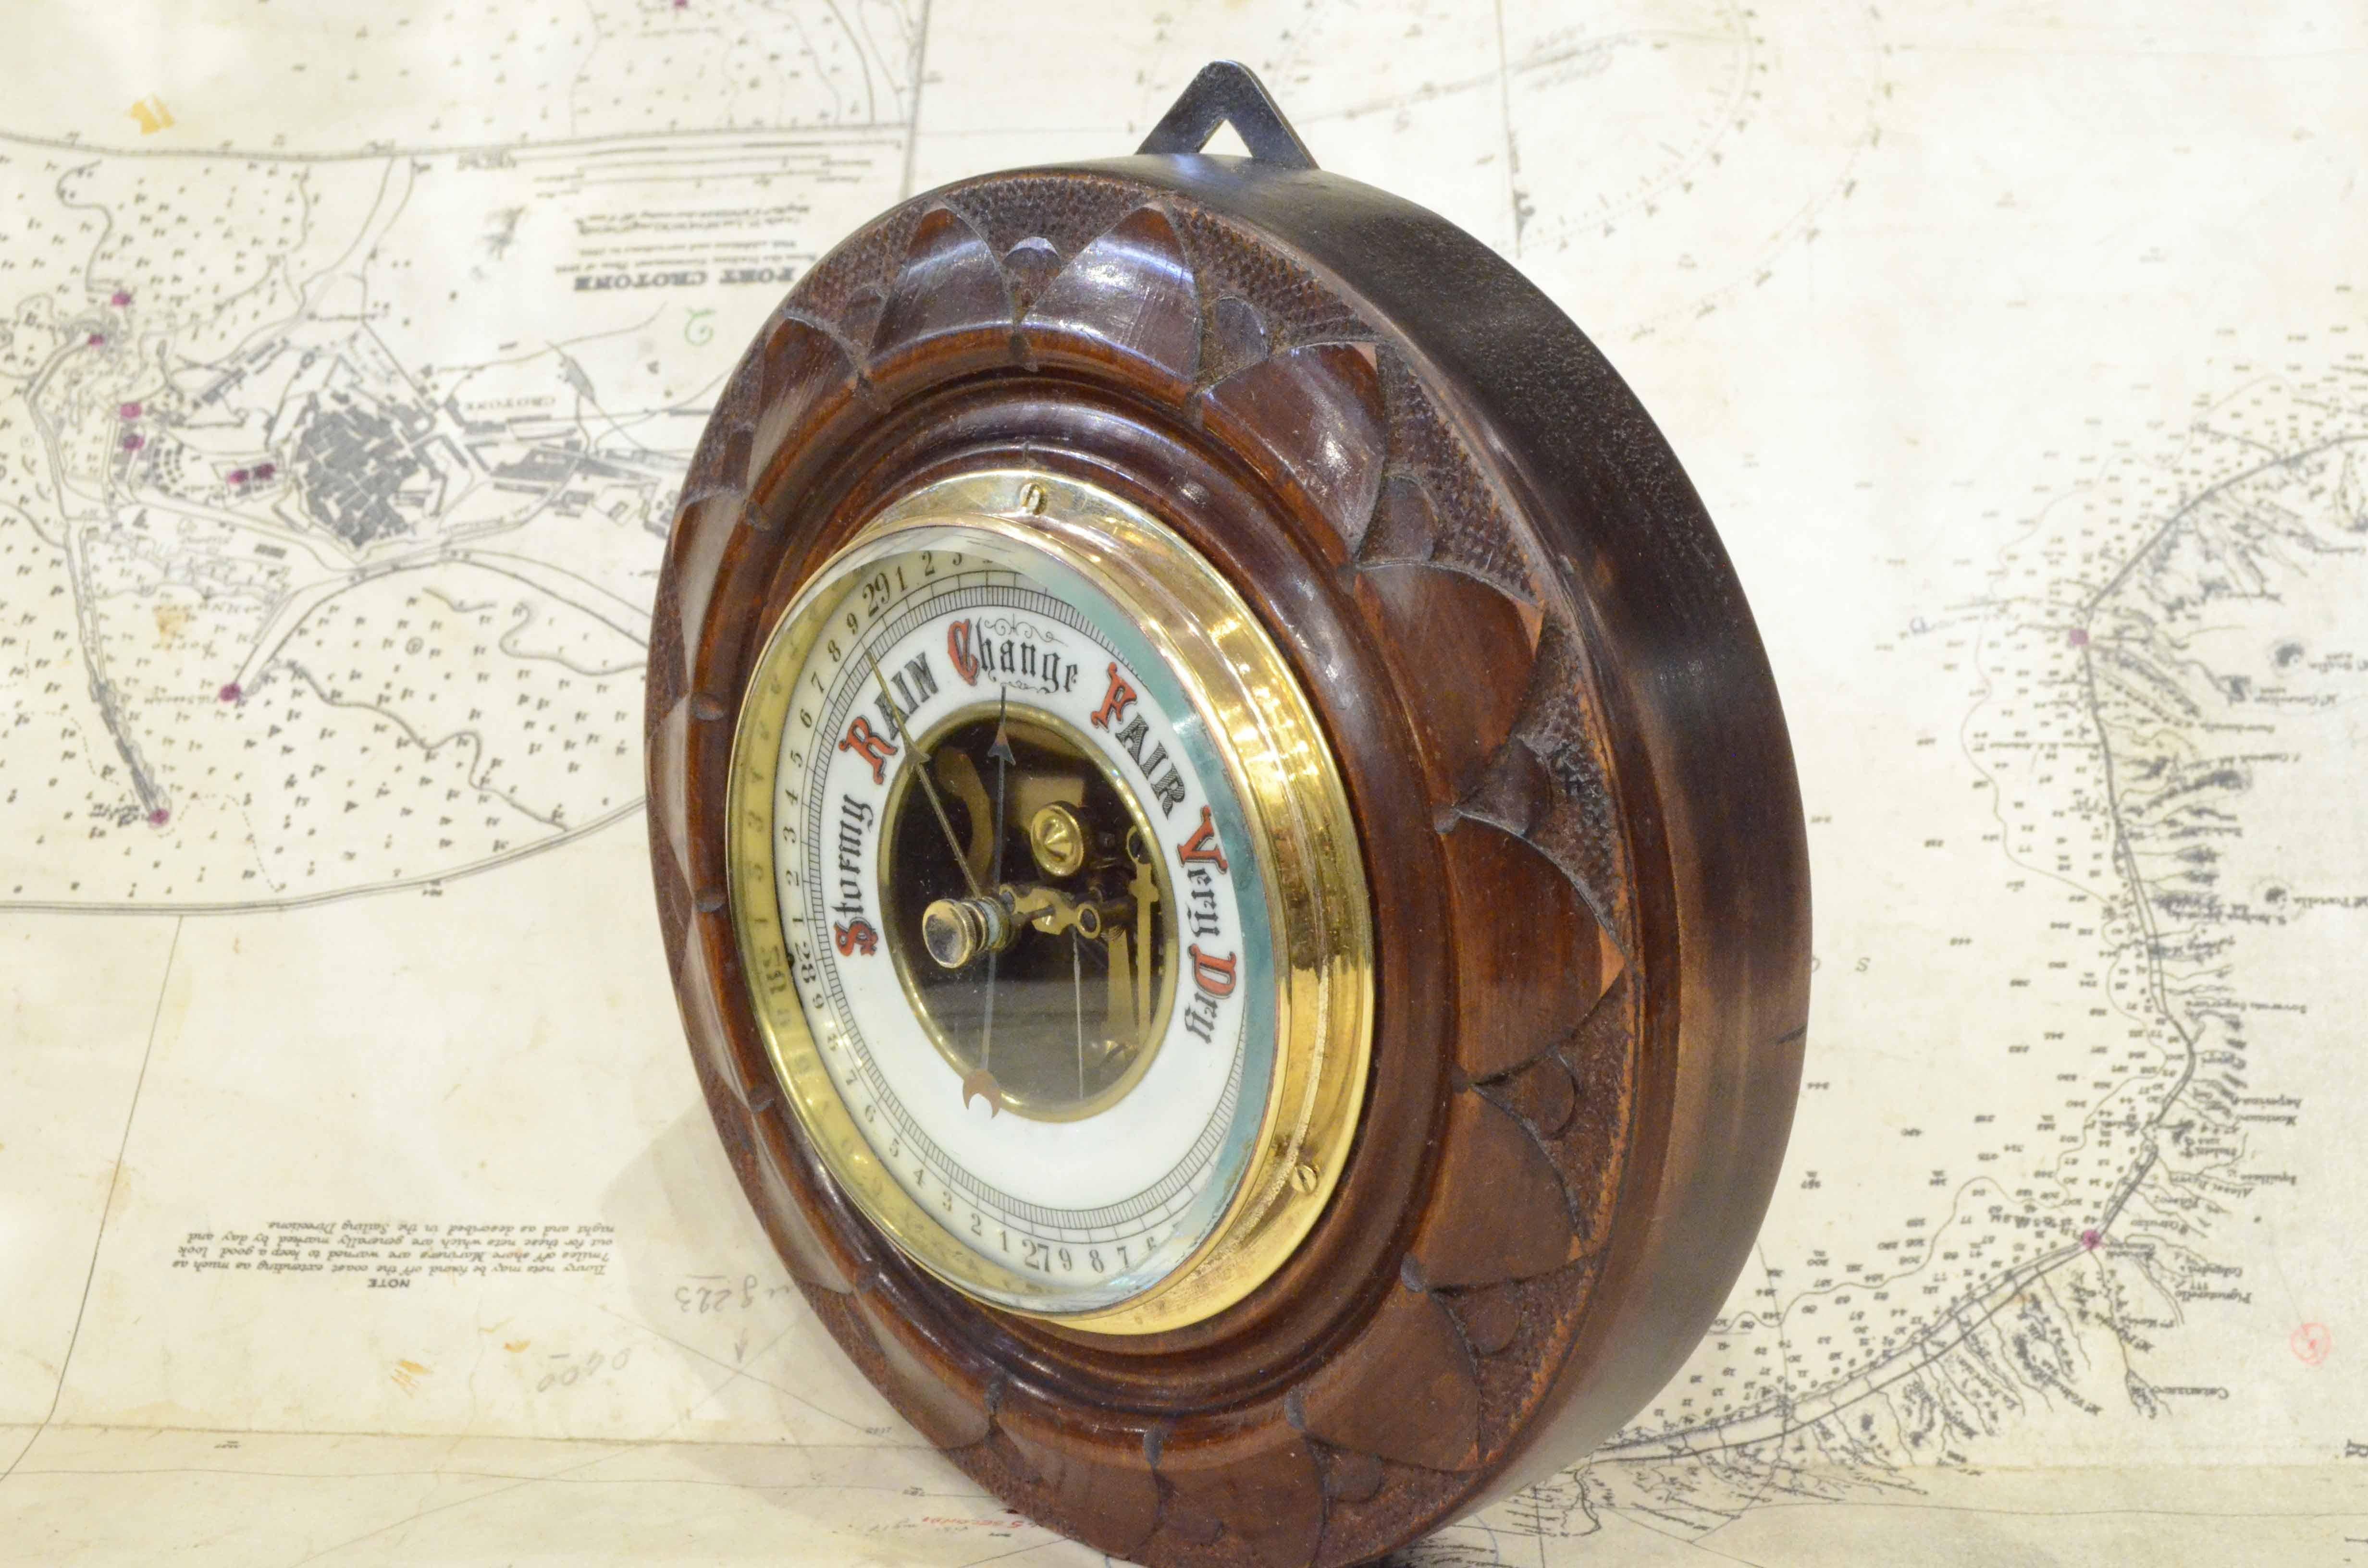 Eaerly 1900s English Carved Woodd Aneroid Barometer Antique Forecast Instrument 2